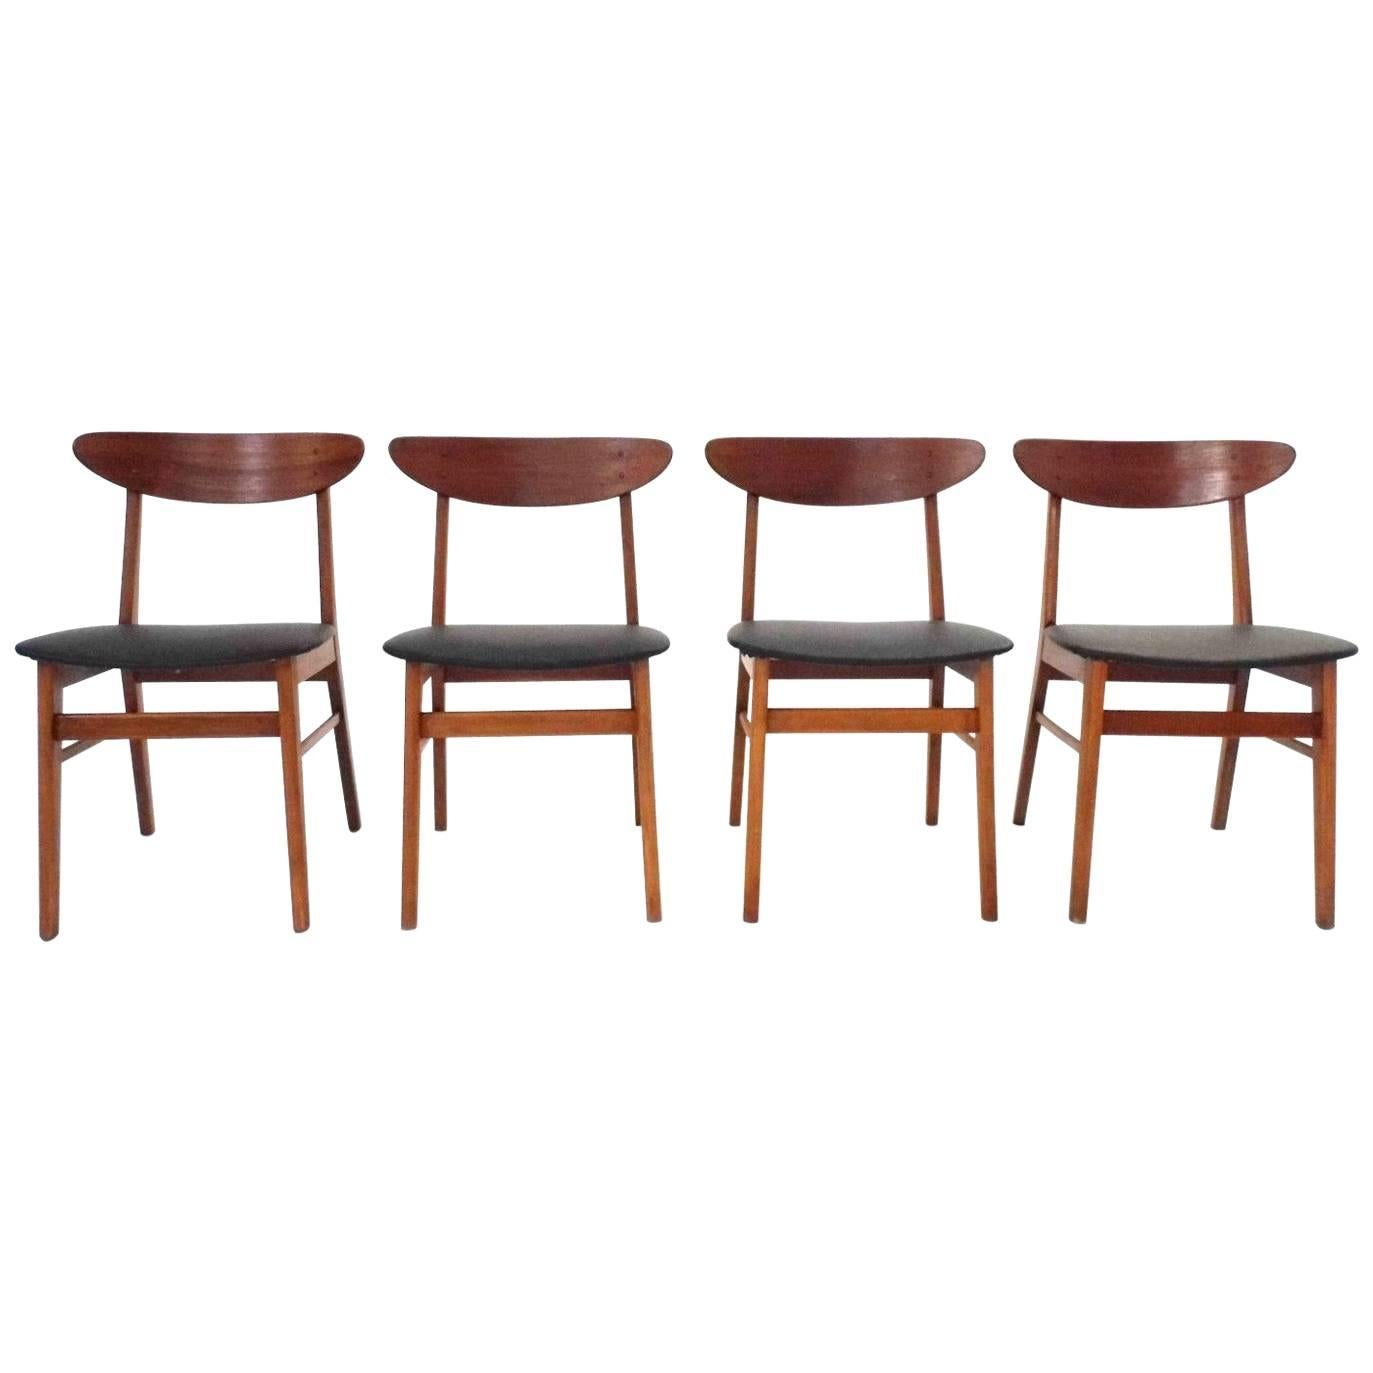 Set of Four Farstrup Teak and Beech Vinyl Dining Chairs Midcentury Chair, 1960s